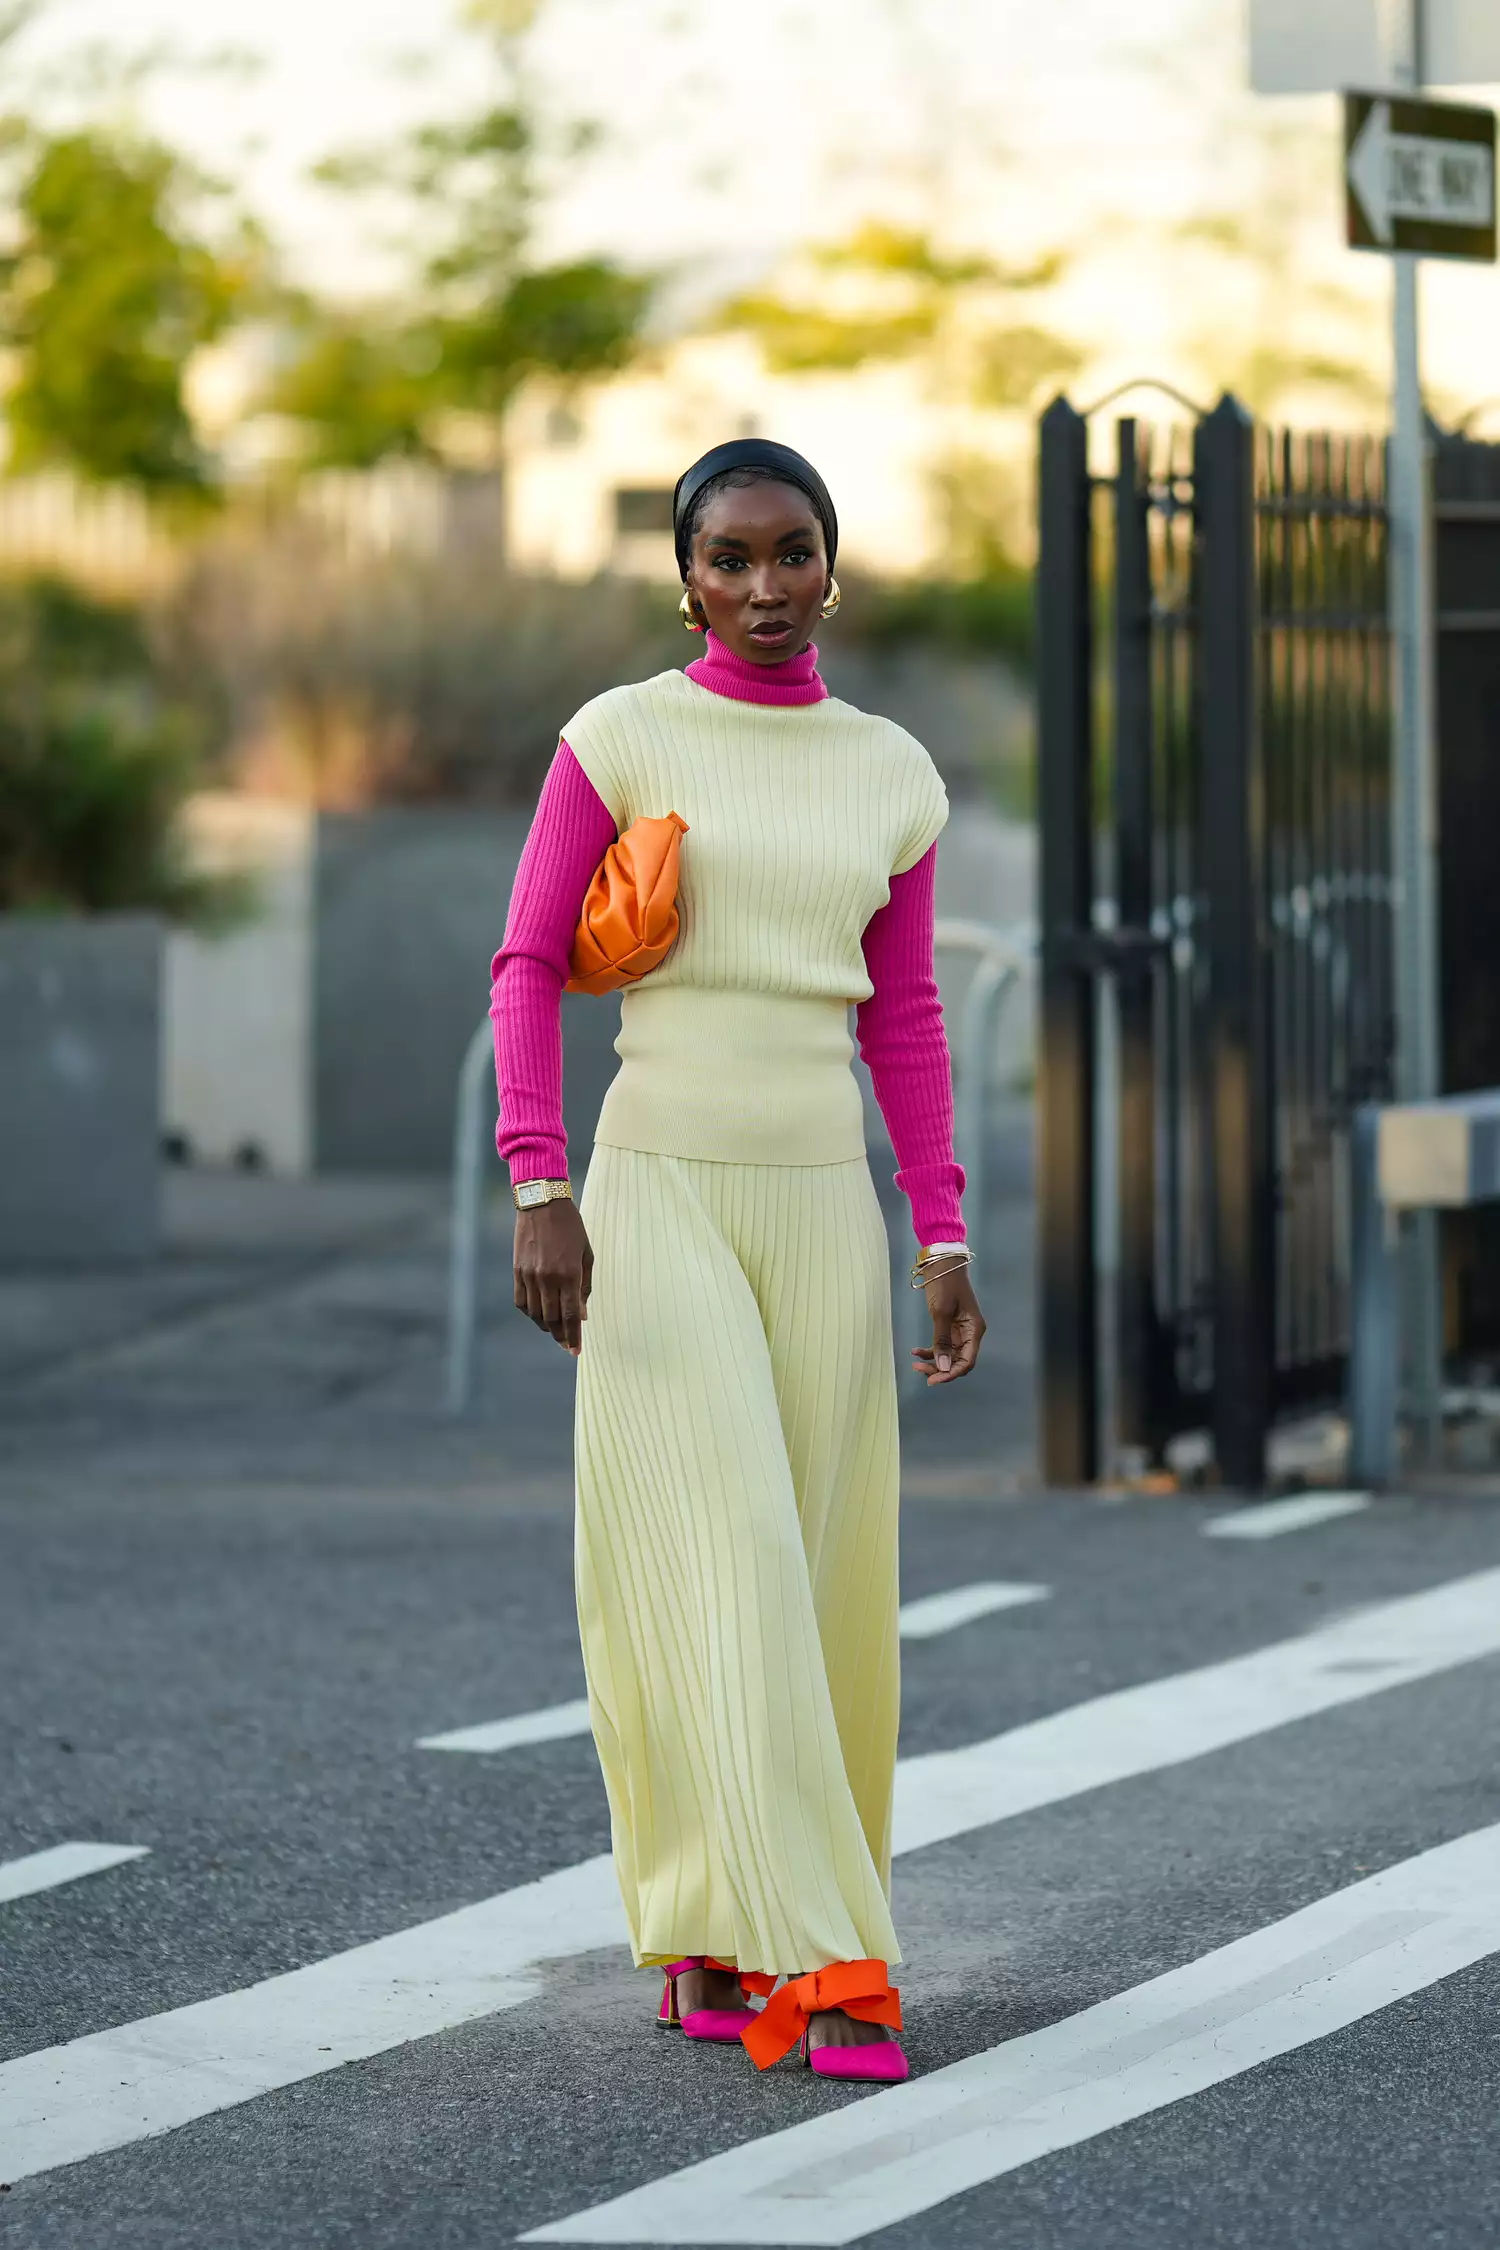 A guest wears a scarf over the head, a neon pink turtleneck top, a yellow pleated sleeveless long dress, pink and orange pointed shoes with attached bow ties